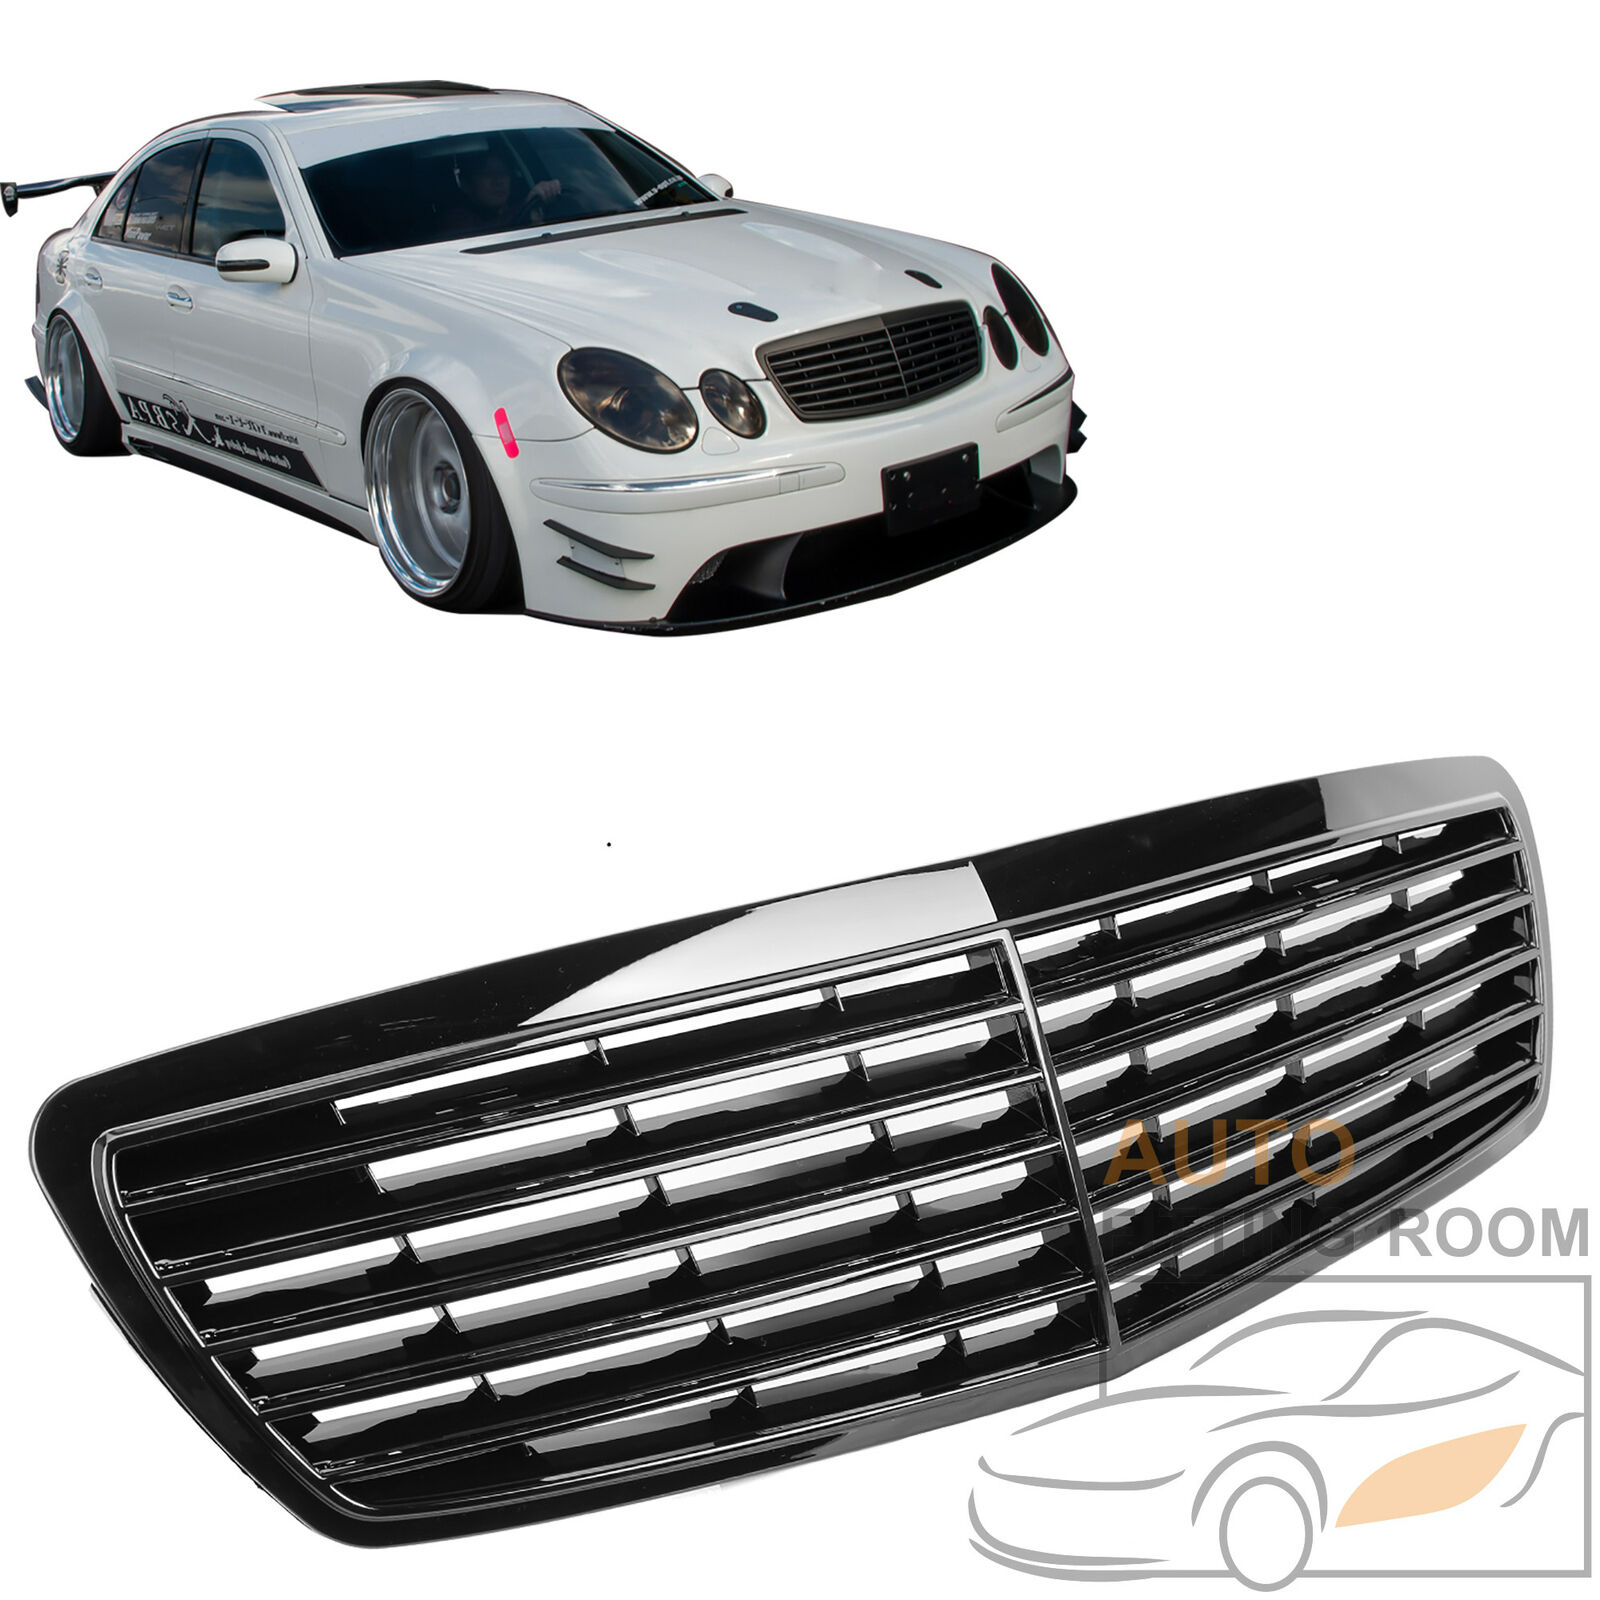 Gloss Black E63 AMG Style Front Grille Grill For Mercedes W211 E320 E350 2002-06